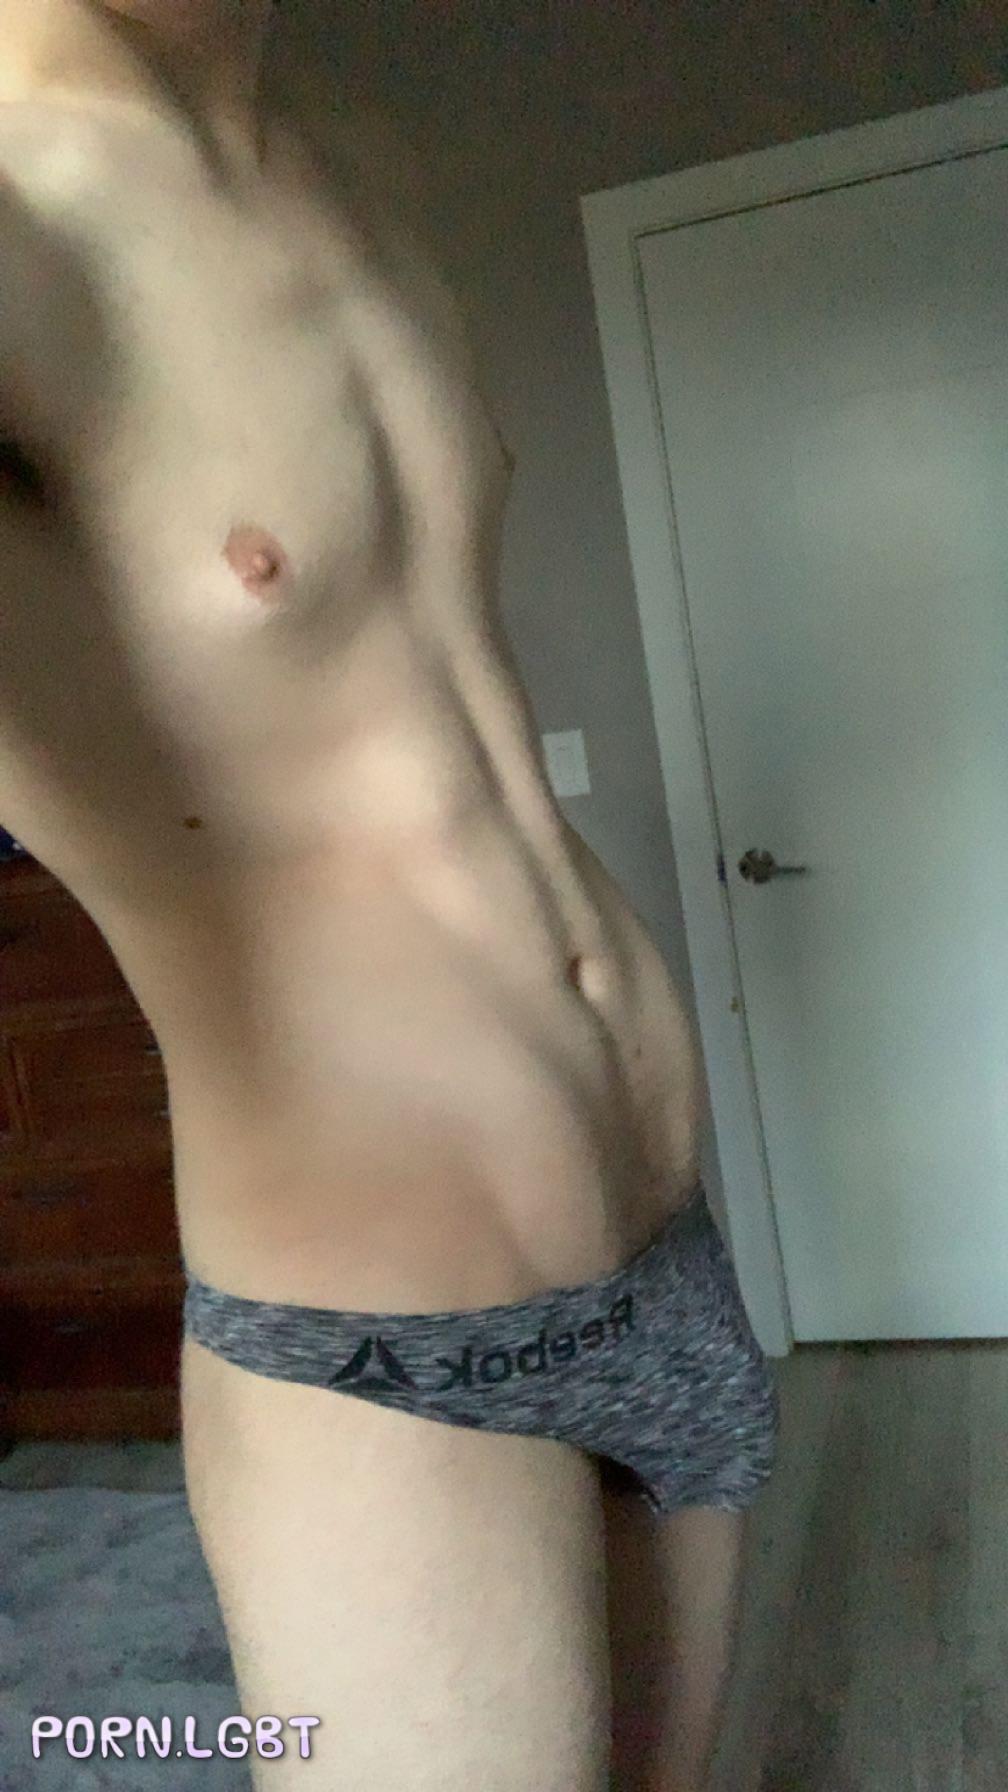 21m its getting too hot to wear anything more than